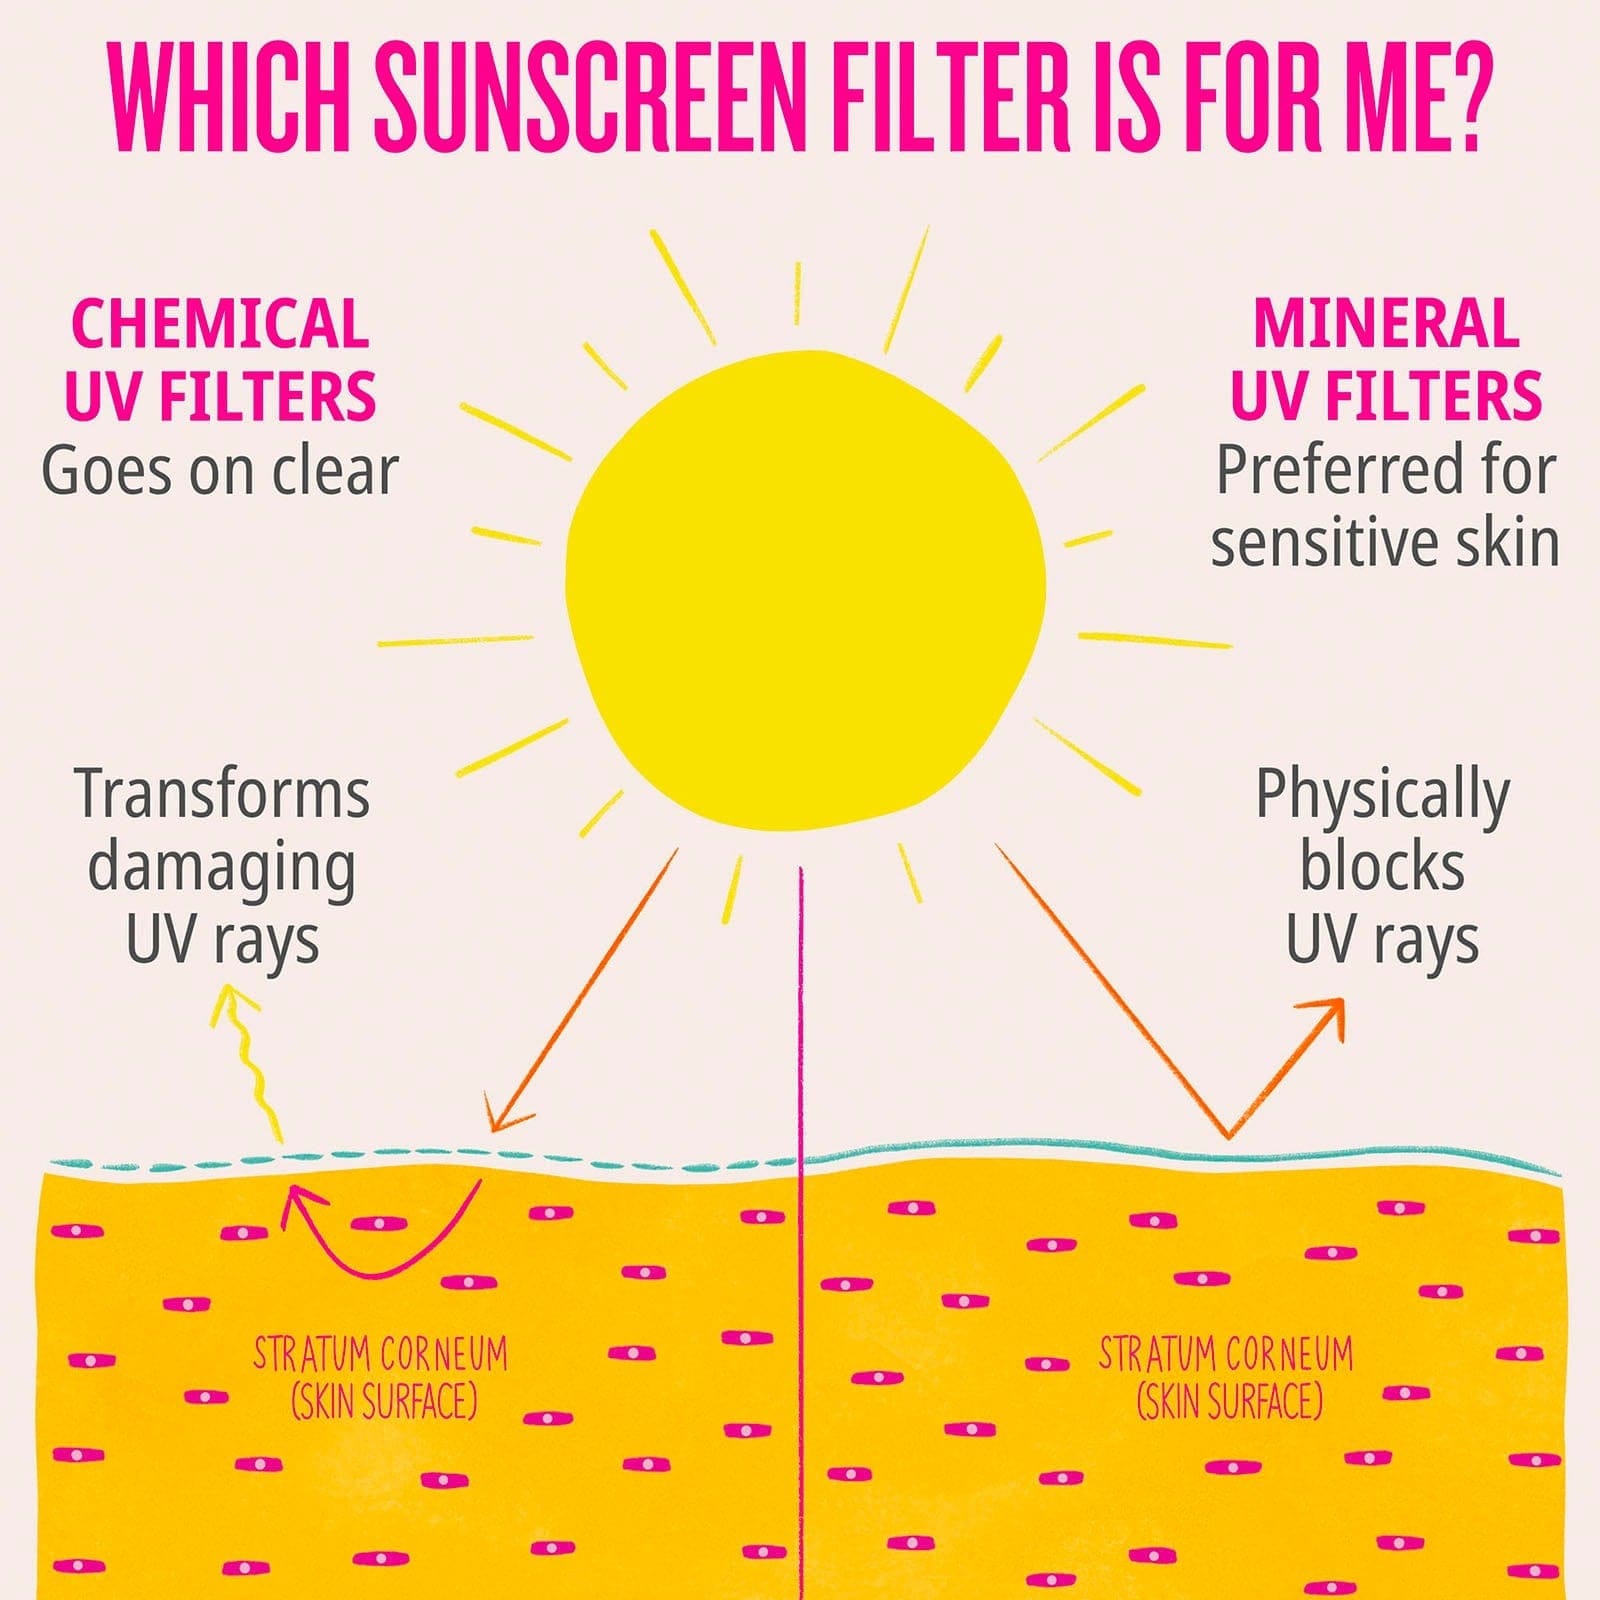 Which sunscreen filter is for me? Chemical uv filters goes on clear vs. Mineral uv filters preferred for sensitive skin 